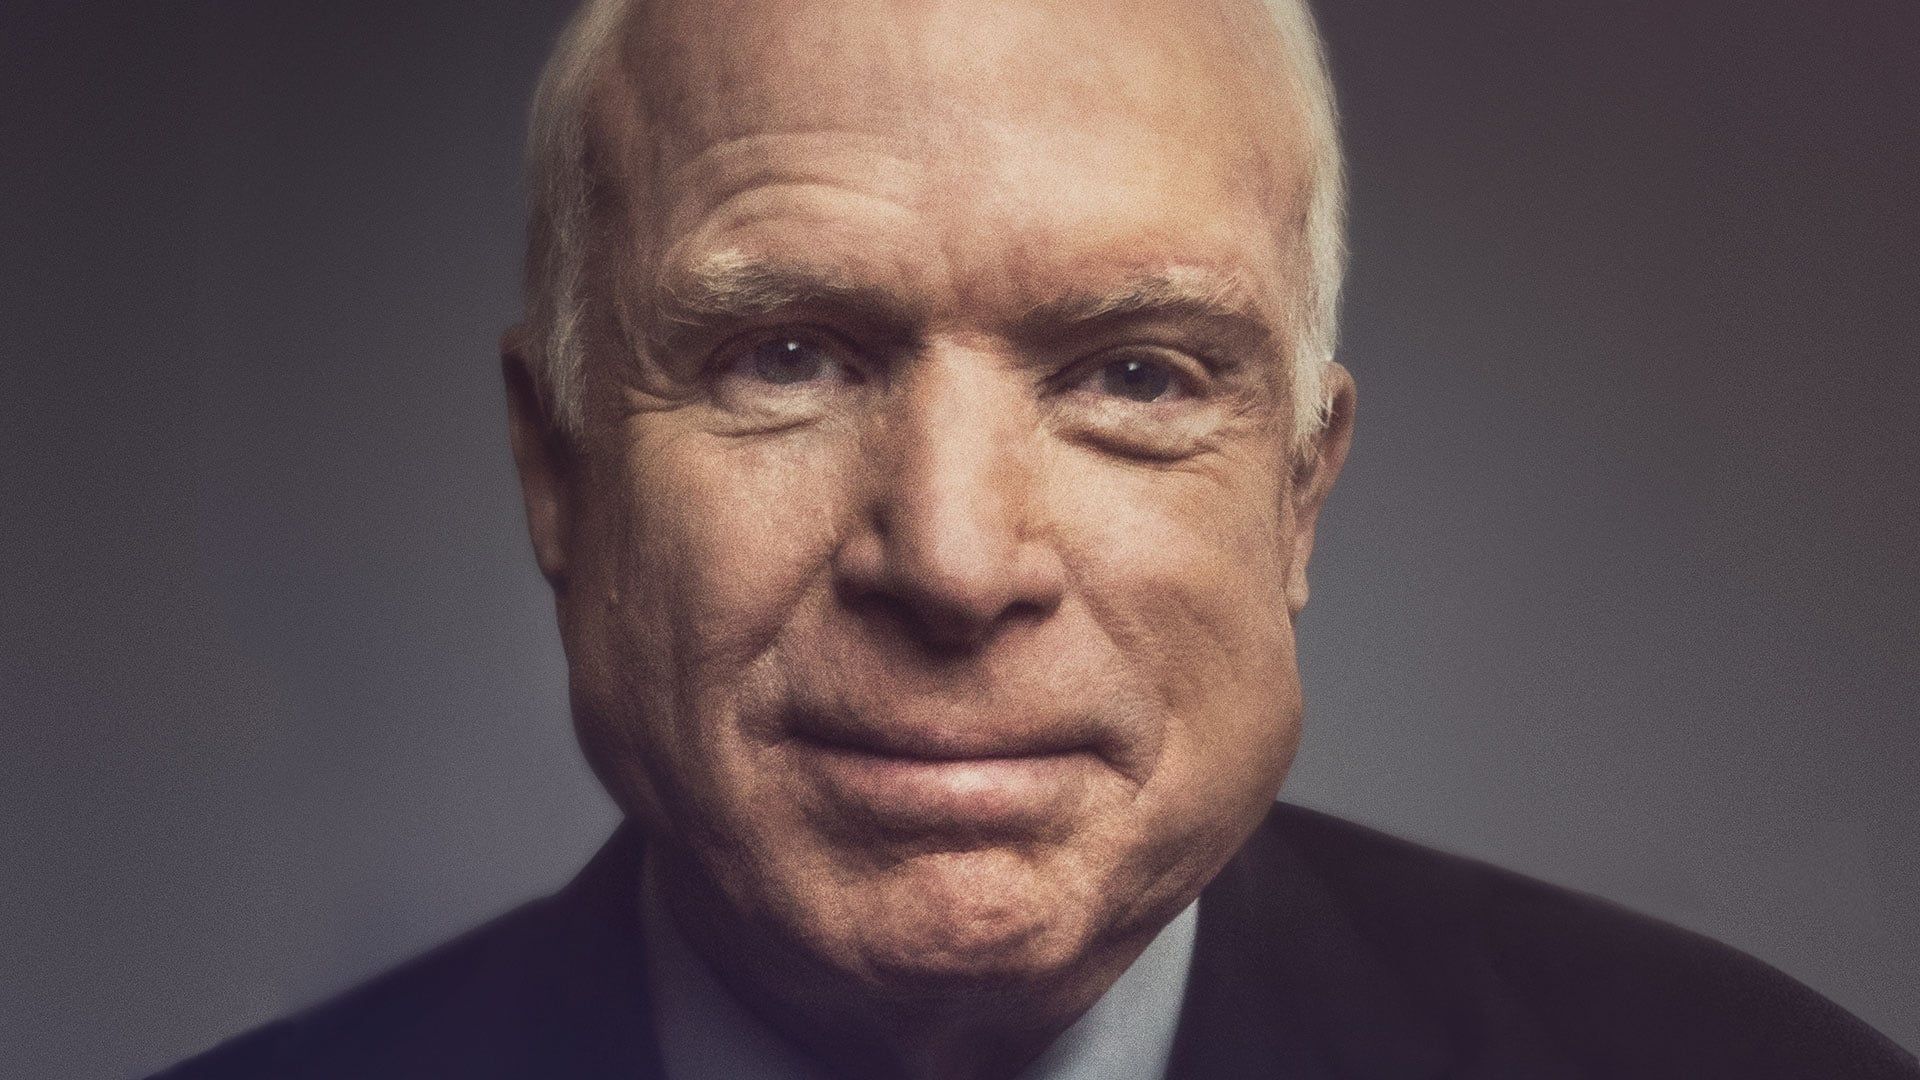 John McCain: For Whom the Bell Tolls Backdrop